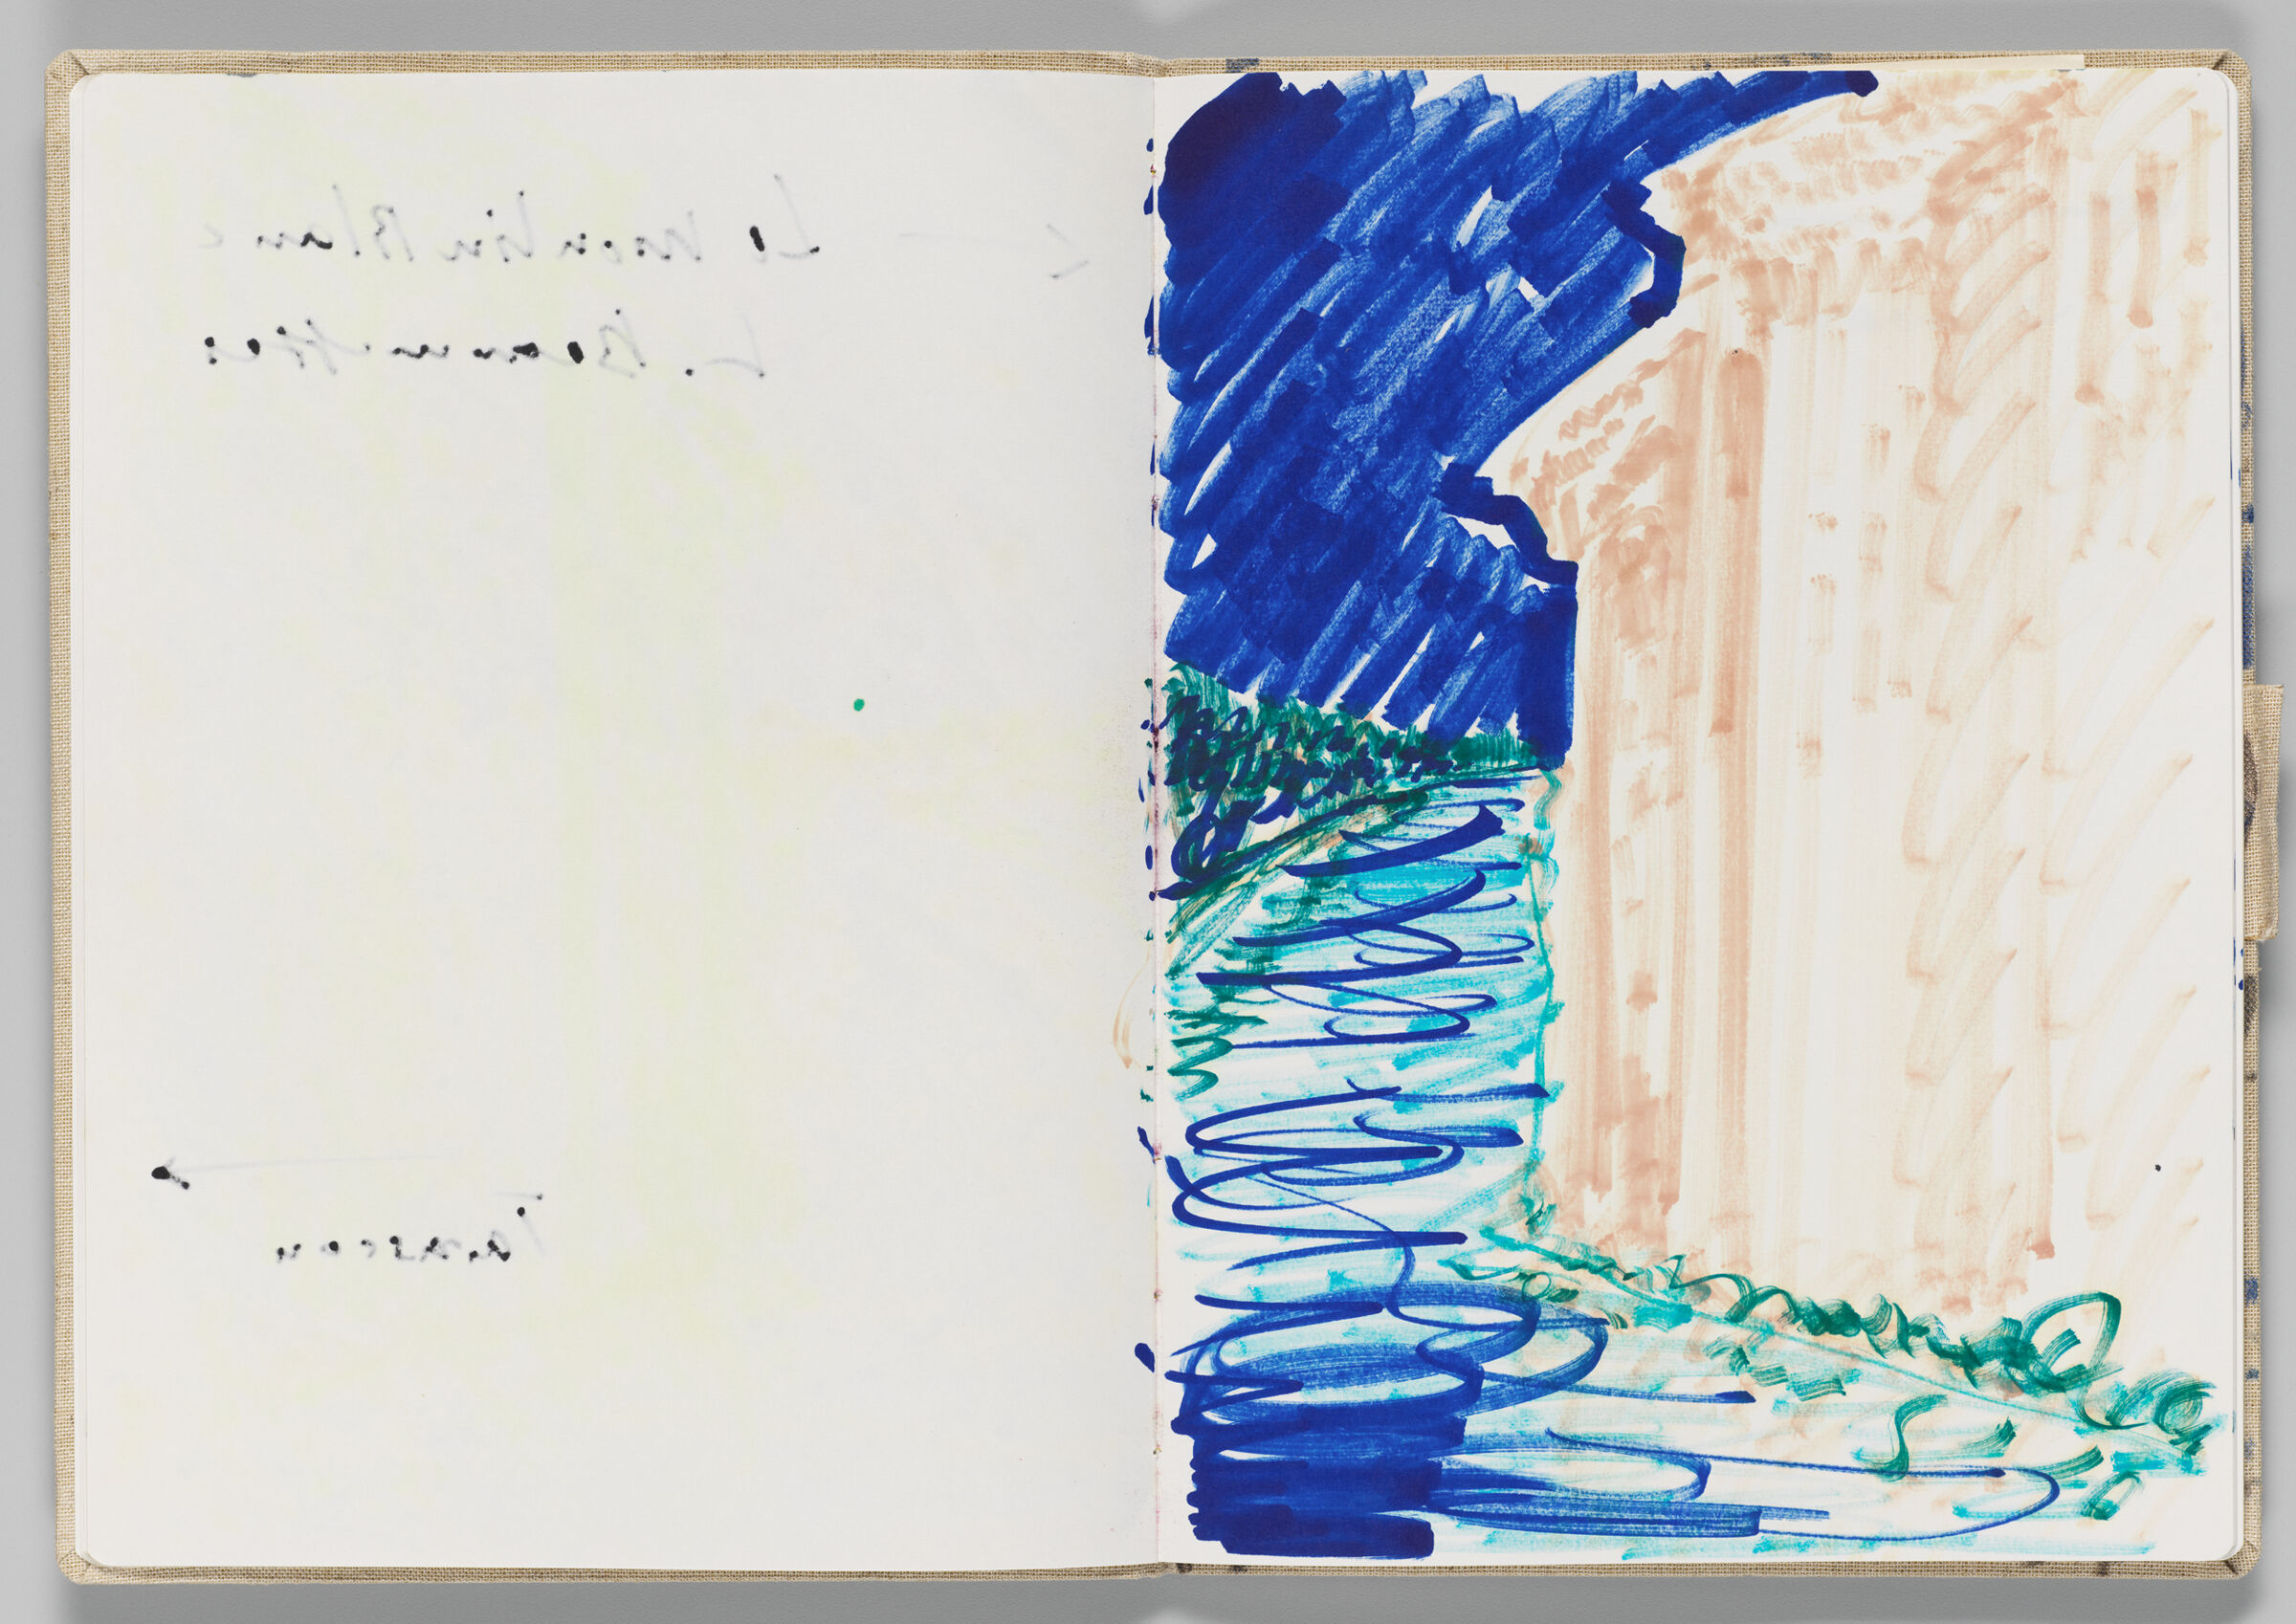 Untitled (Bleed-Through Of Previous Page, Left Page); Untitled (Tarascon Castle On The Rhône, France, Right Page)